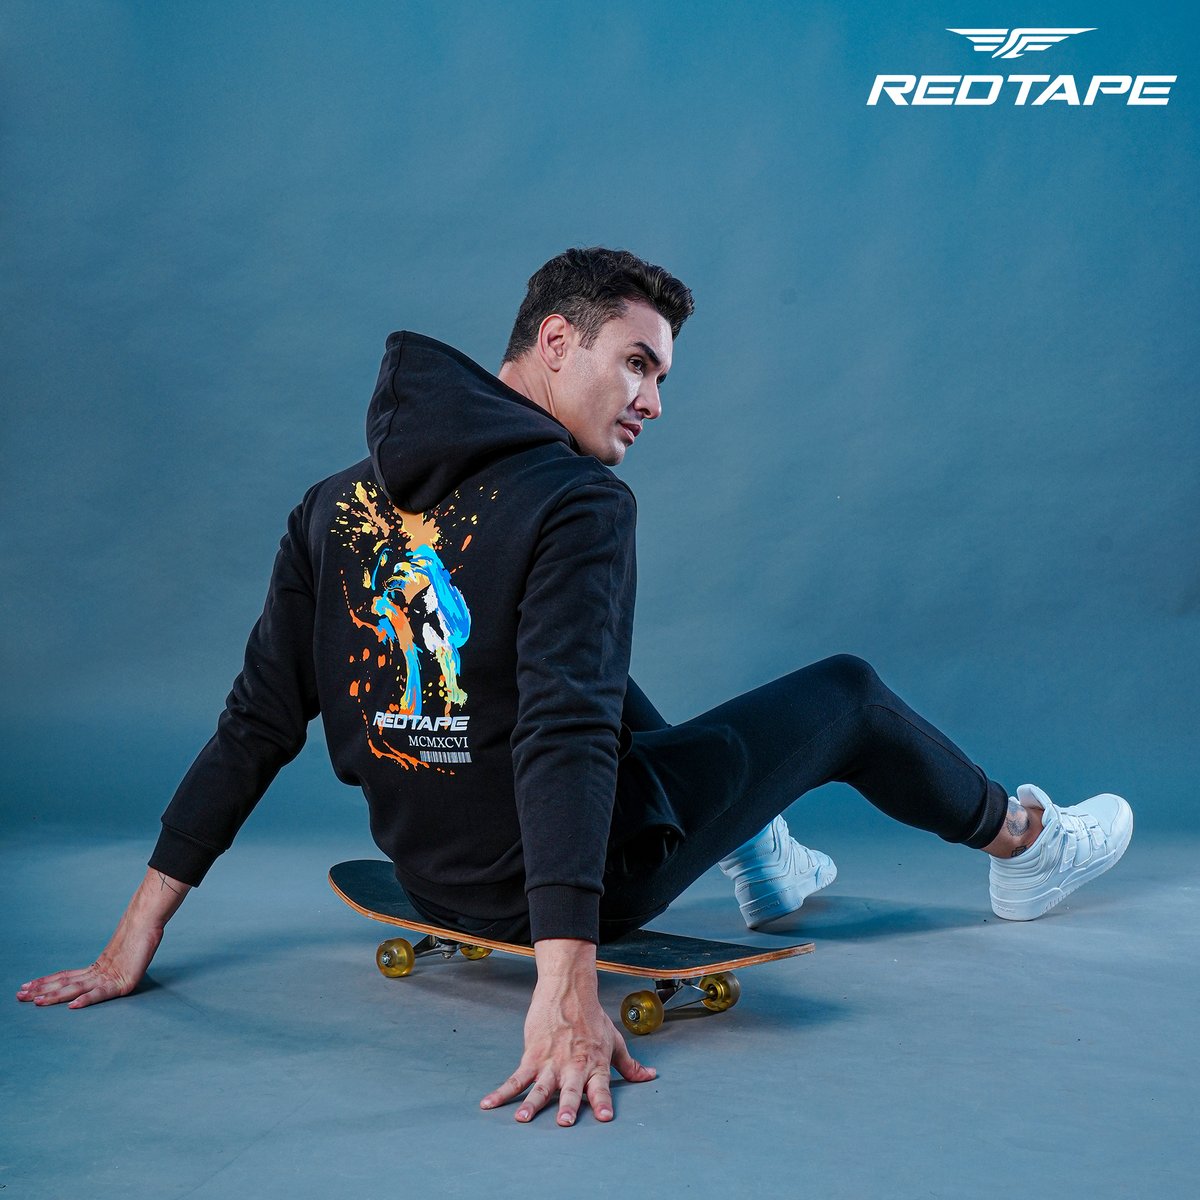 Grab your hoodie, hit the streets and let your skater spirit shine! . . Buy: redtape.com/RSL0085?search… . . #redtapestyle #hoodiehustle #streetwearswag #fashionforward #graphicvibes #boldstatements #casualcool #wearthetalk #styleonpoint #urbanchic #fashiongoals #standoutstyle #ootd